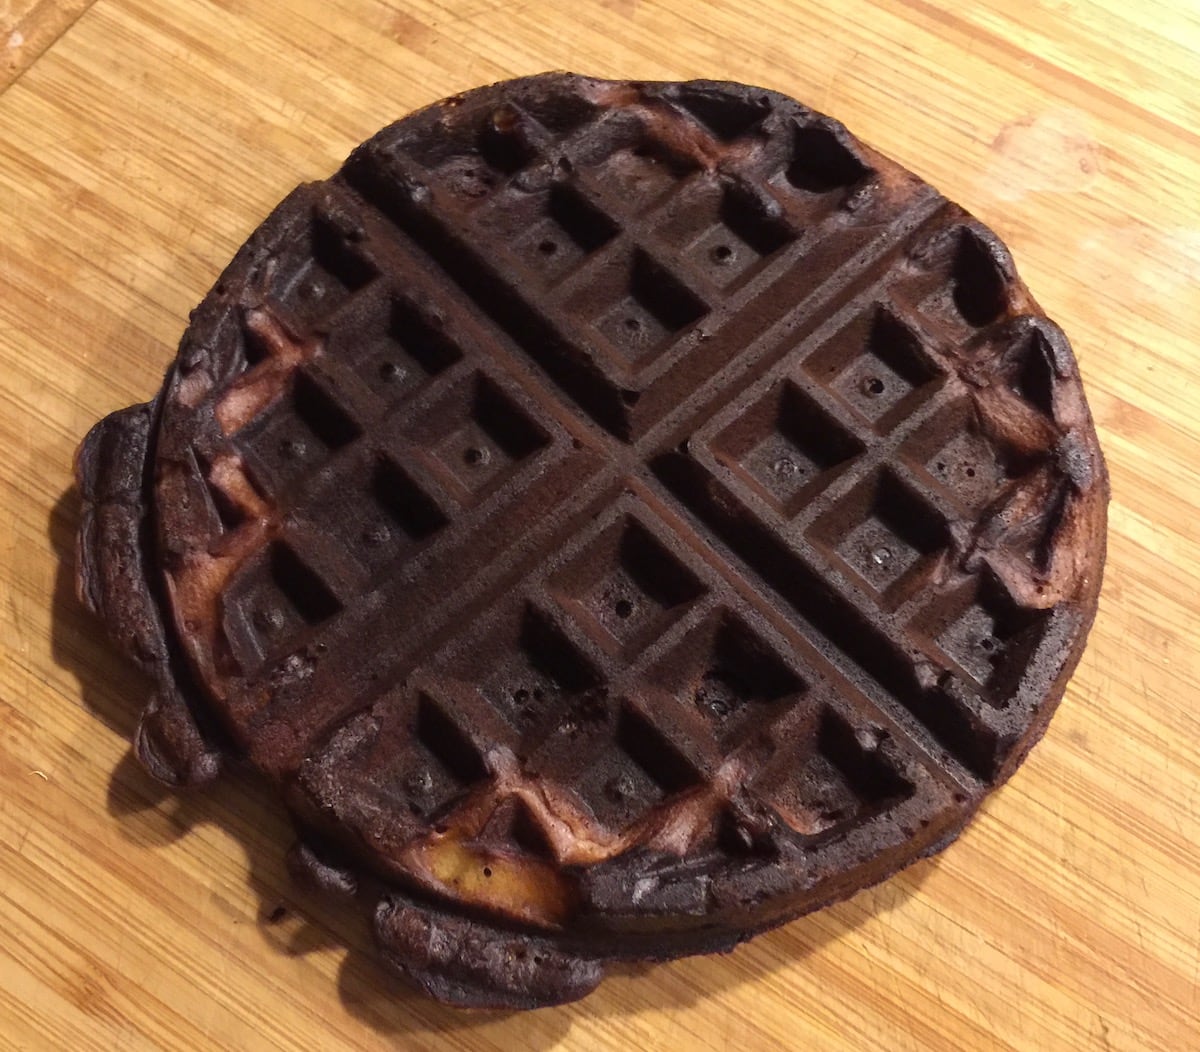 30-minute waffles are not gourmet